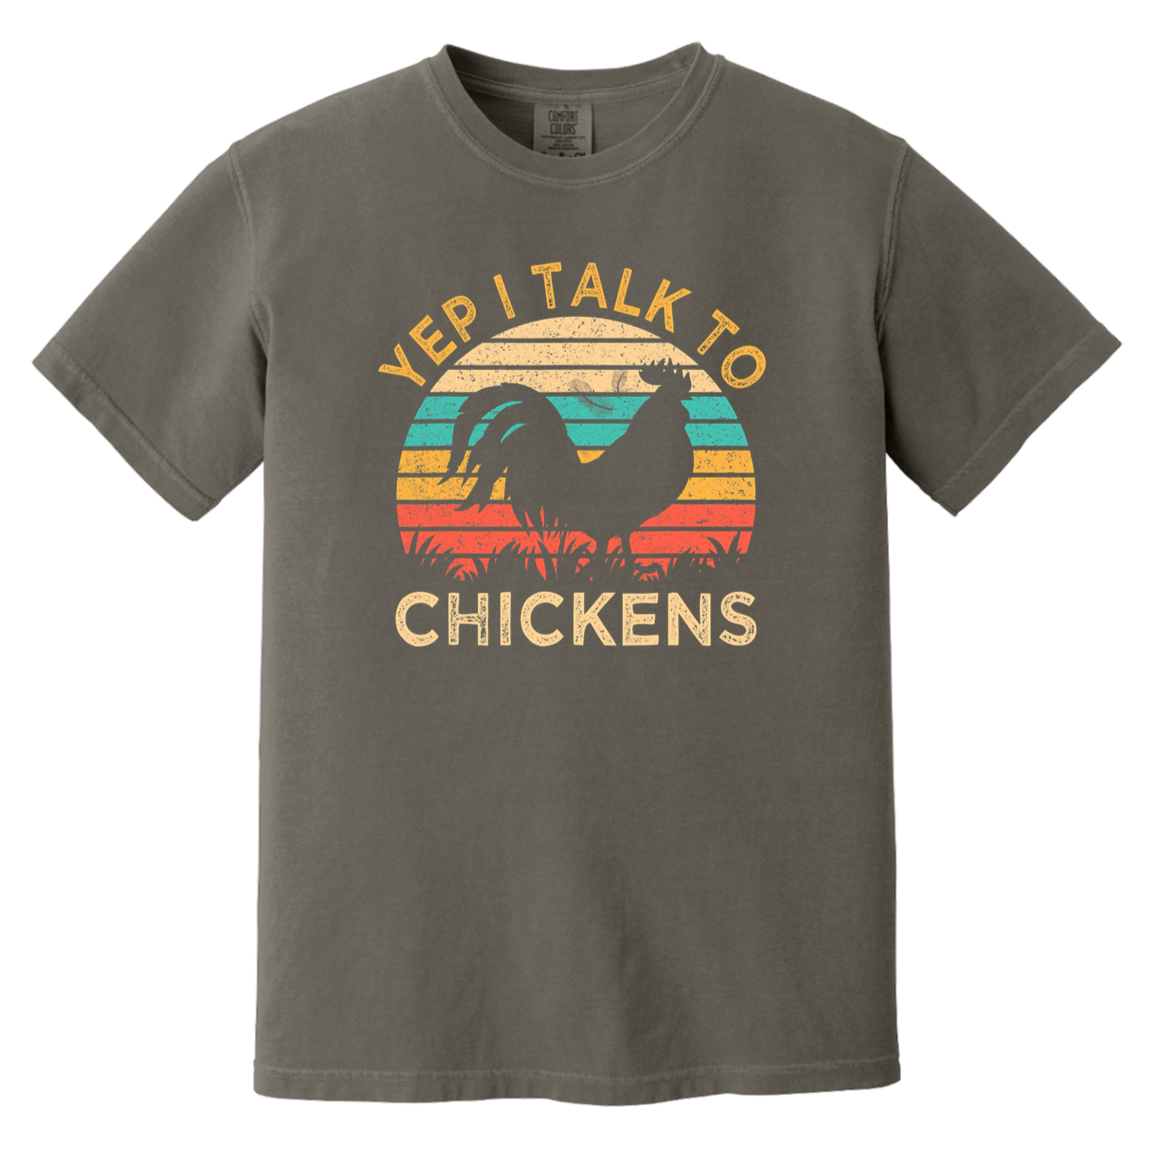 Chickens Vintage Funny Heavyweight Garment-Dyed T-Shirt